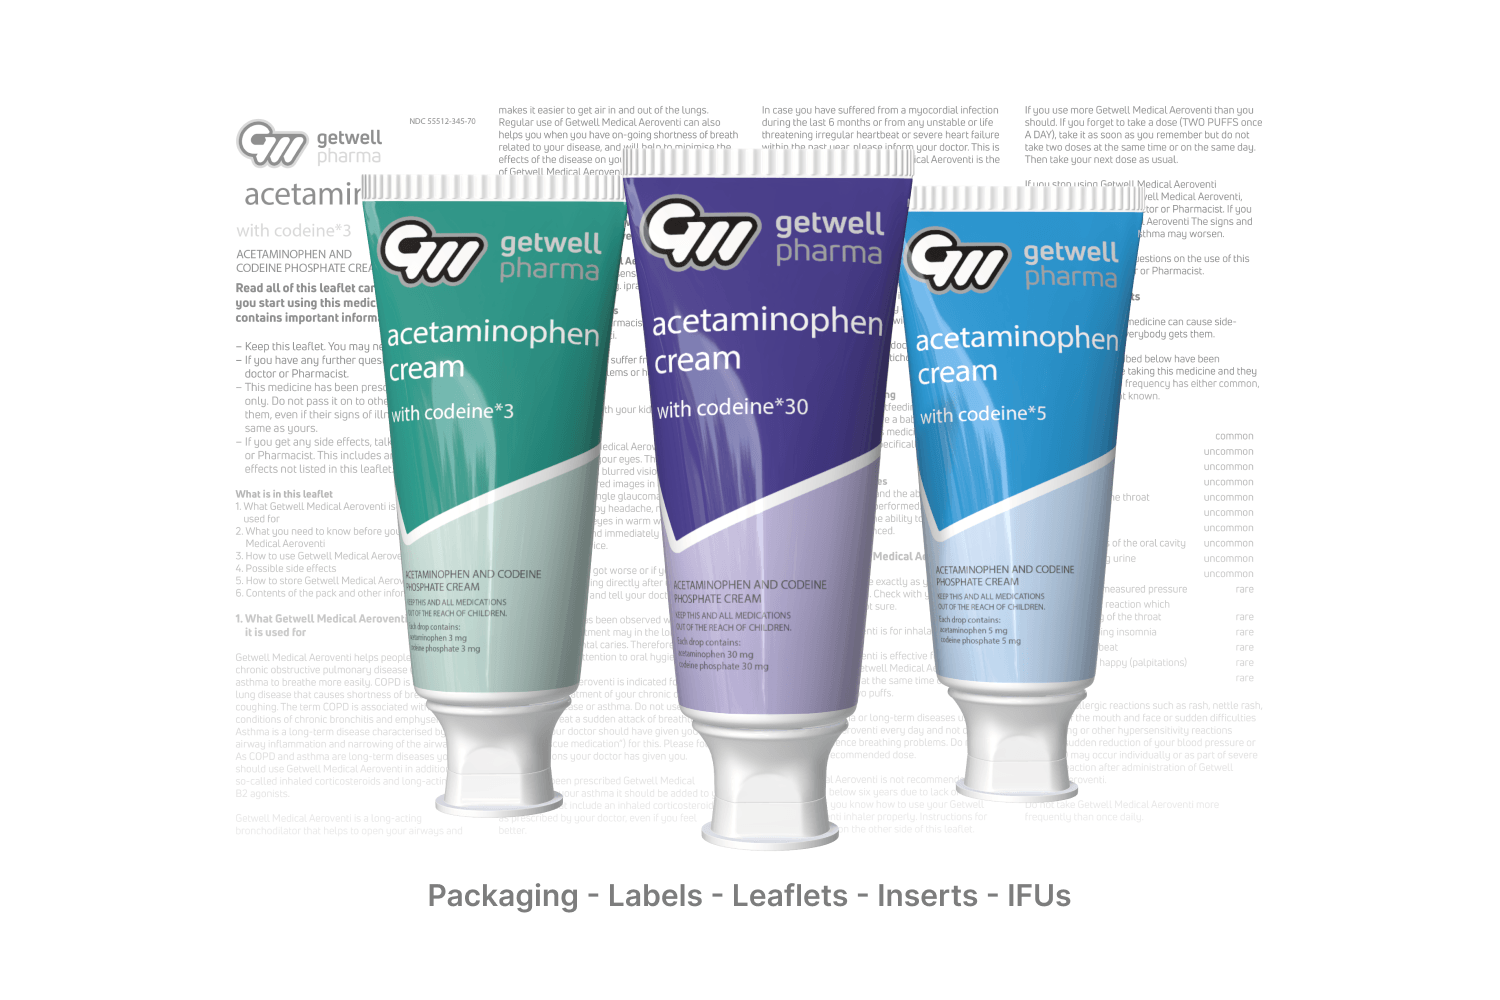 images of different versions of a pharma cream in front of a leaflet